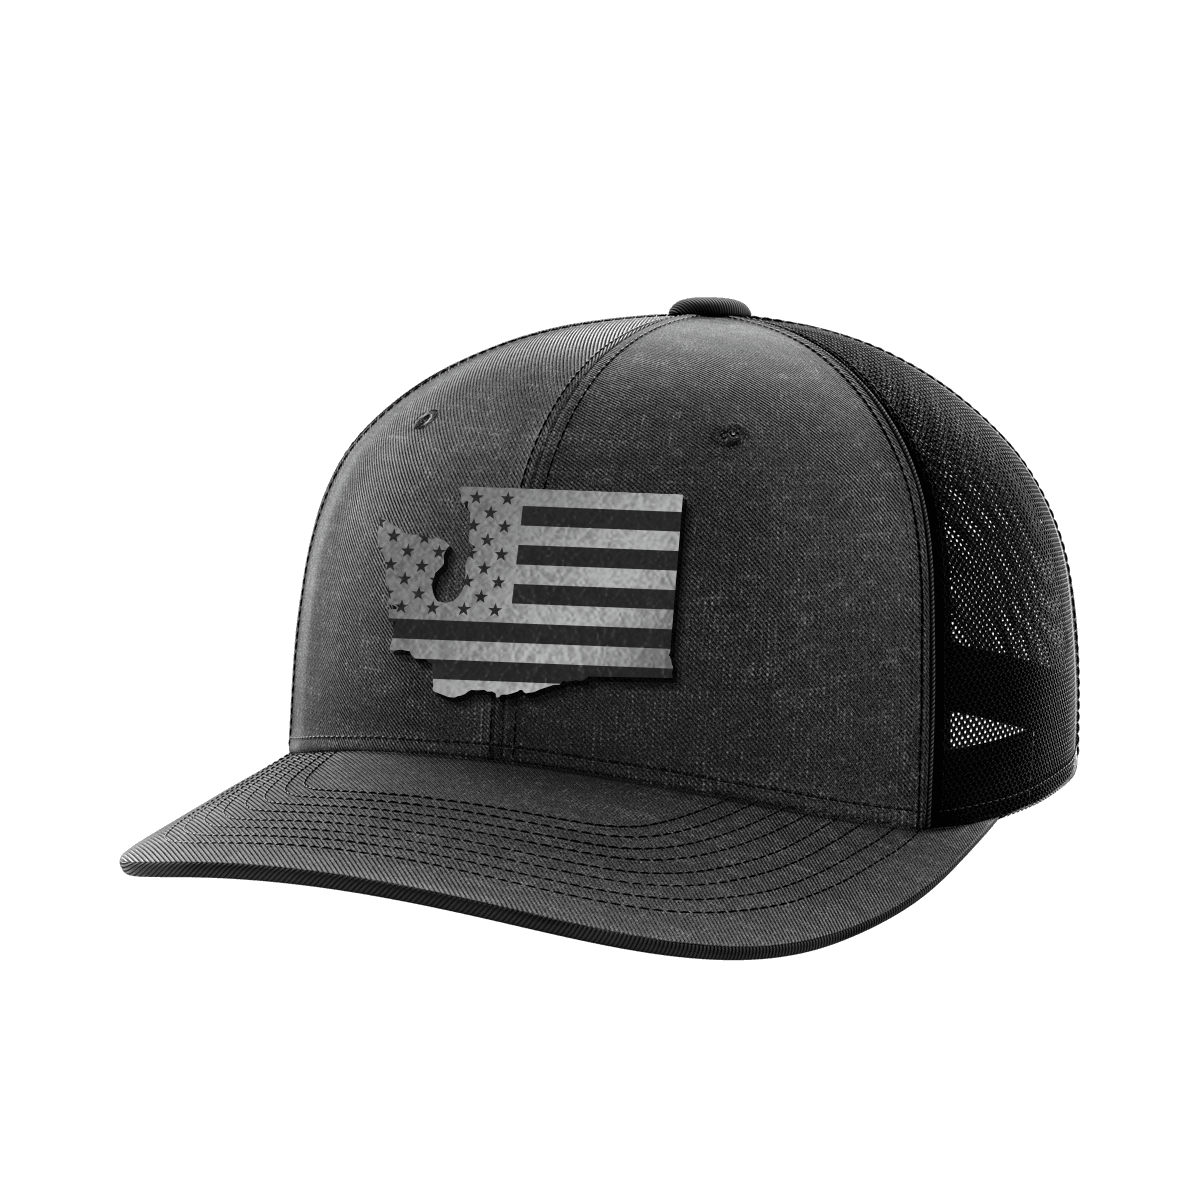 Washington United Collection (black leather) - Greater Half